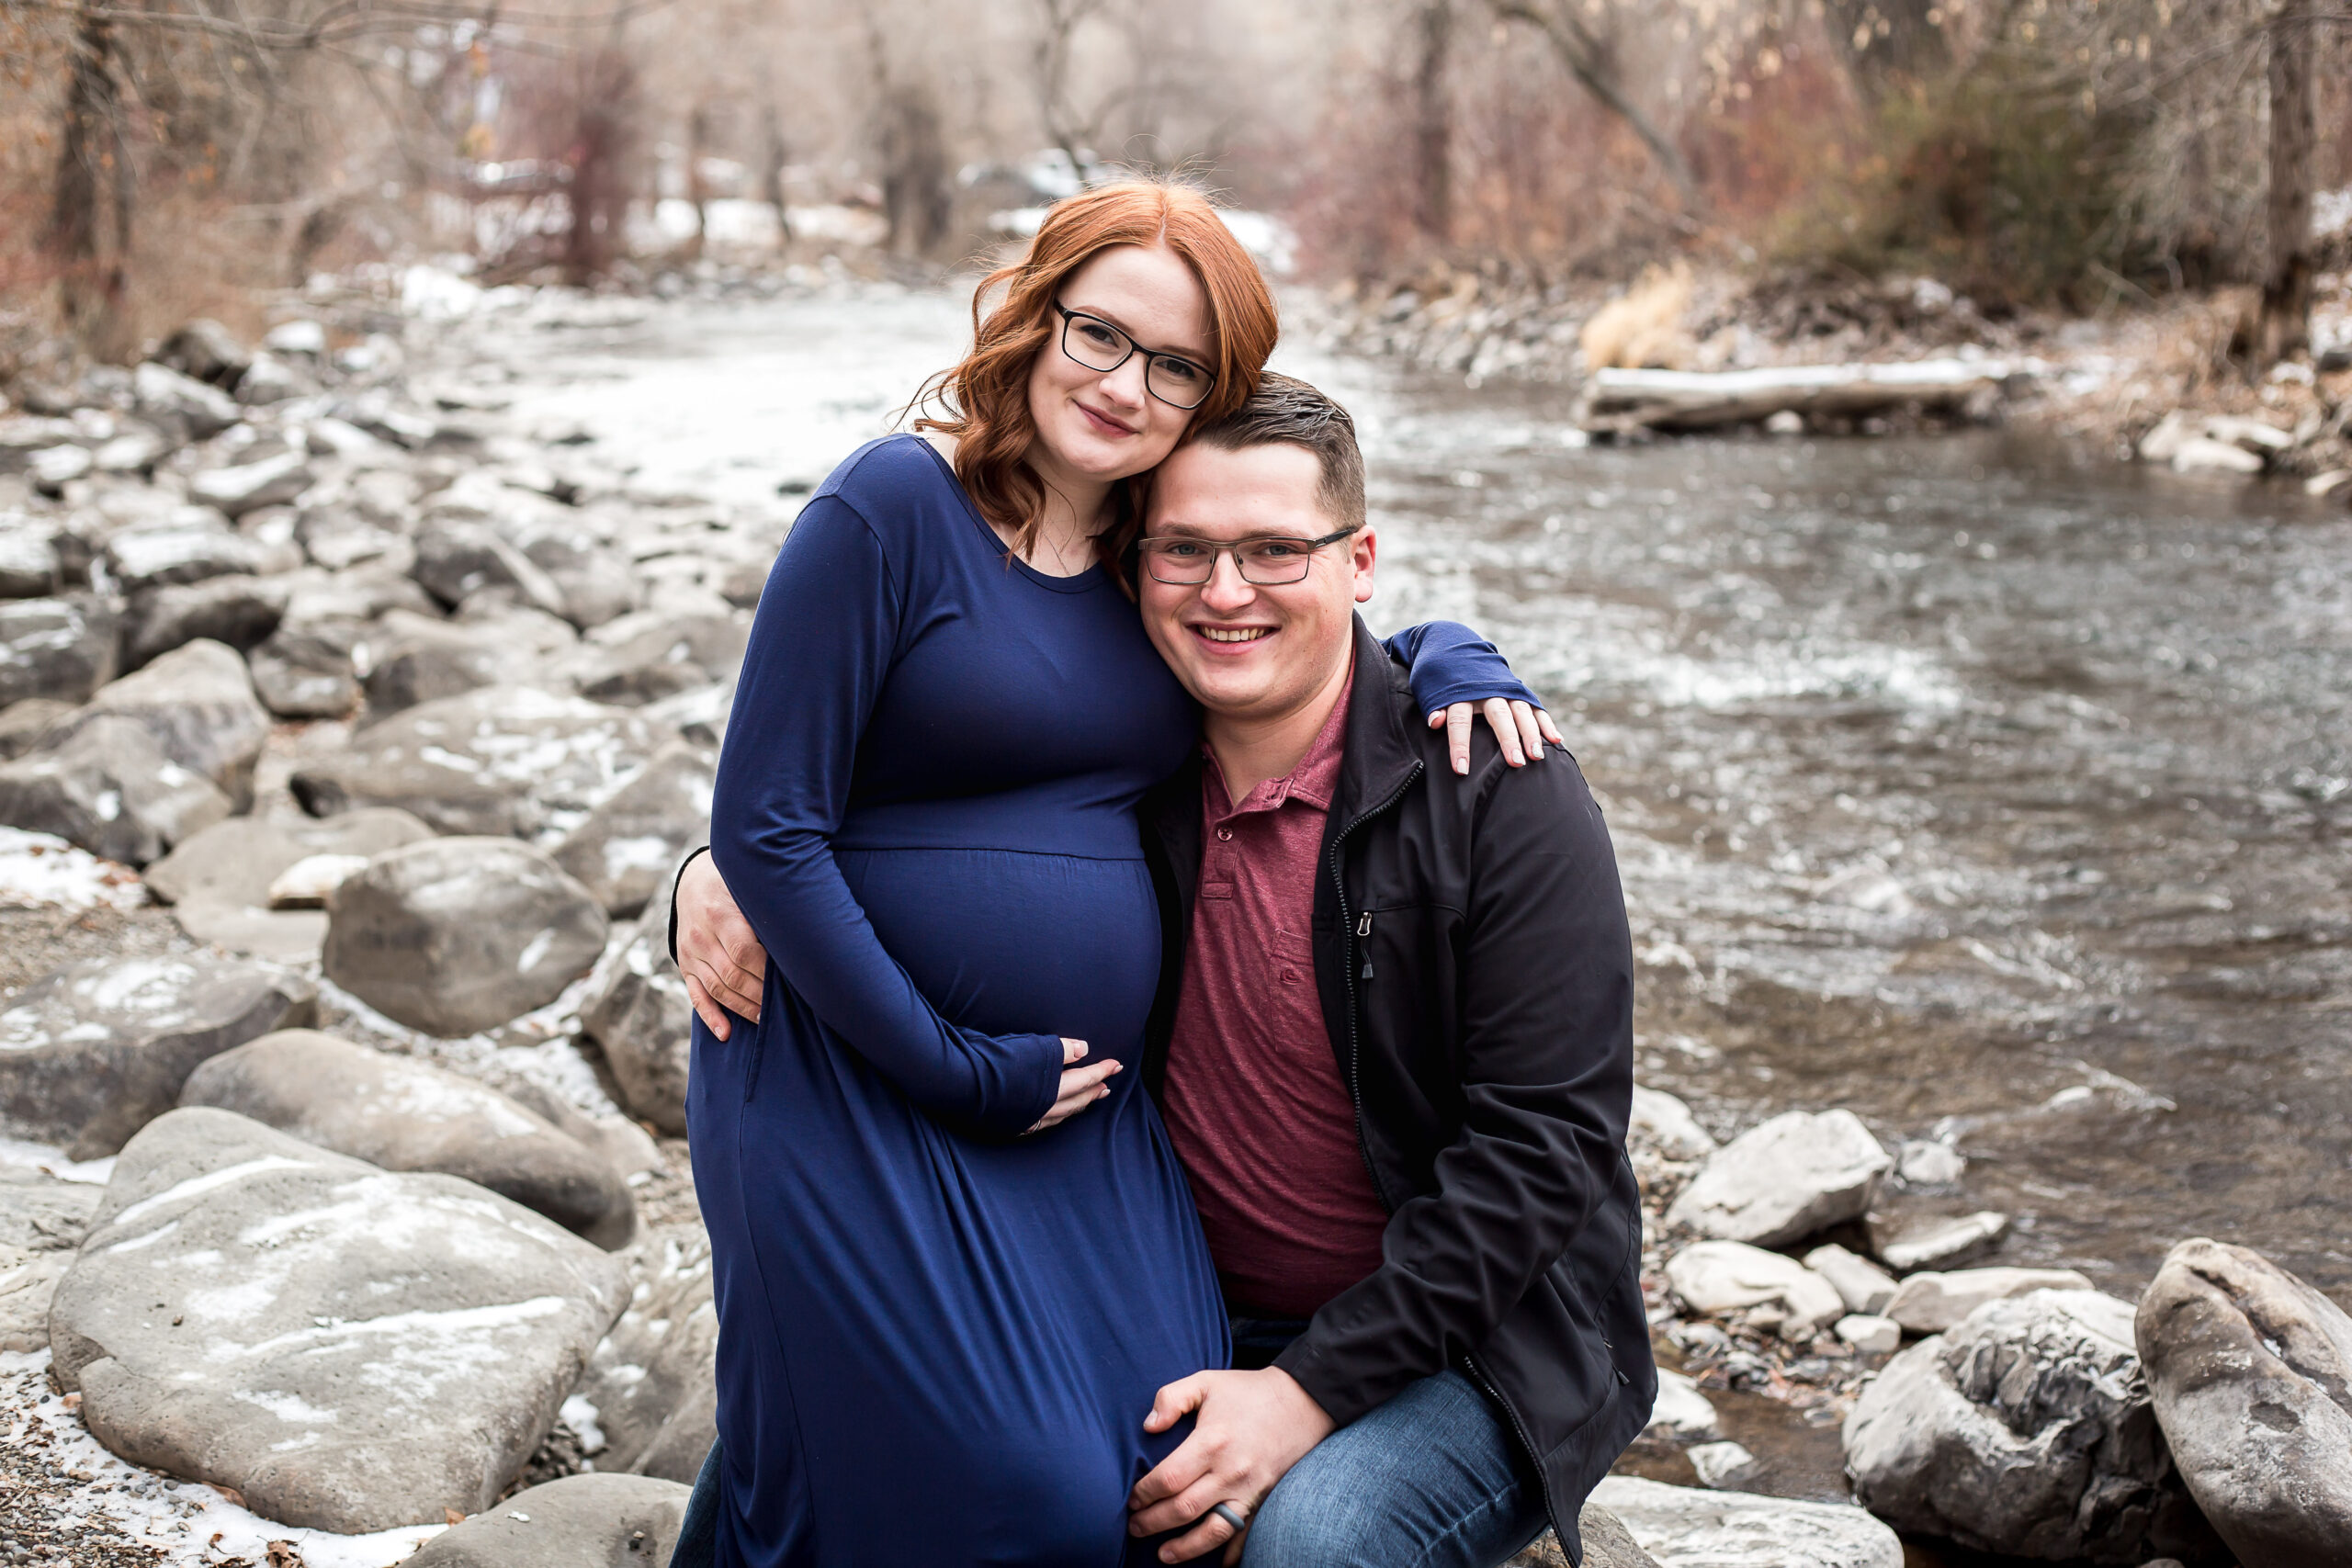 A couple sit by a river posing for a photo during their maternity session. They are anxiously awaiting the birth of their first child, a daughter.